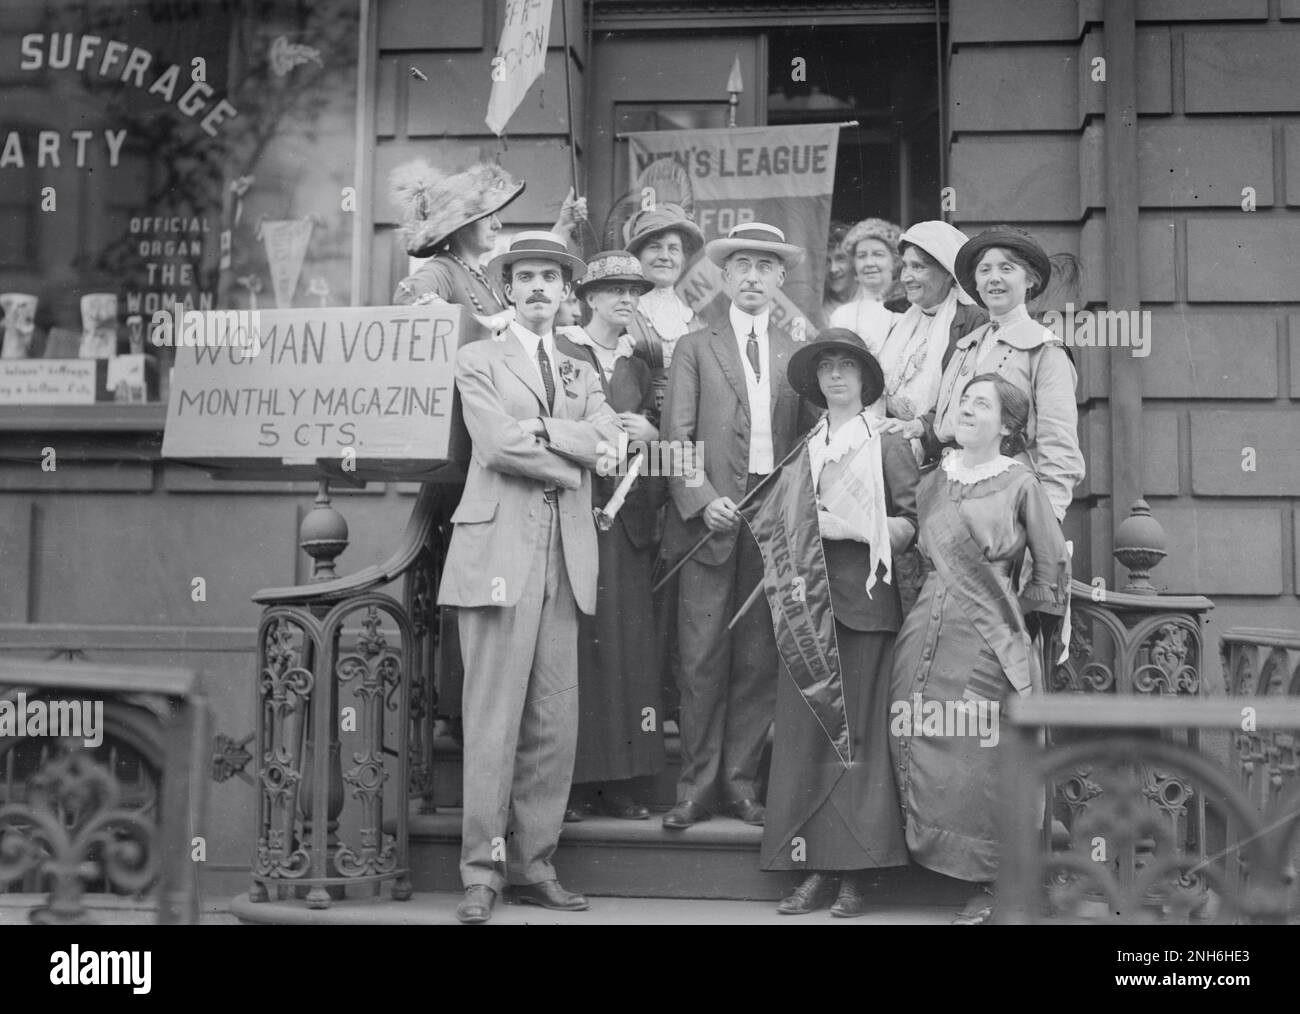 Members of the Men's League for Woman Suffrage in New York at the Woman's Suffrage Party of Manhattan - 1913 Stock Photo